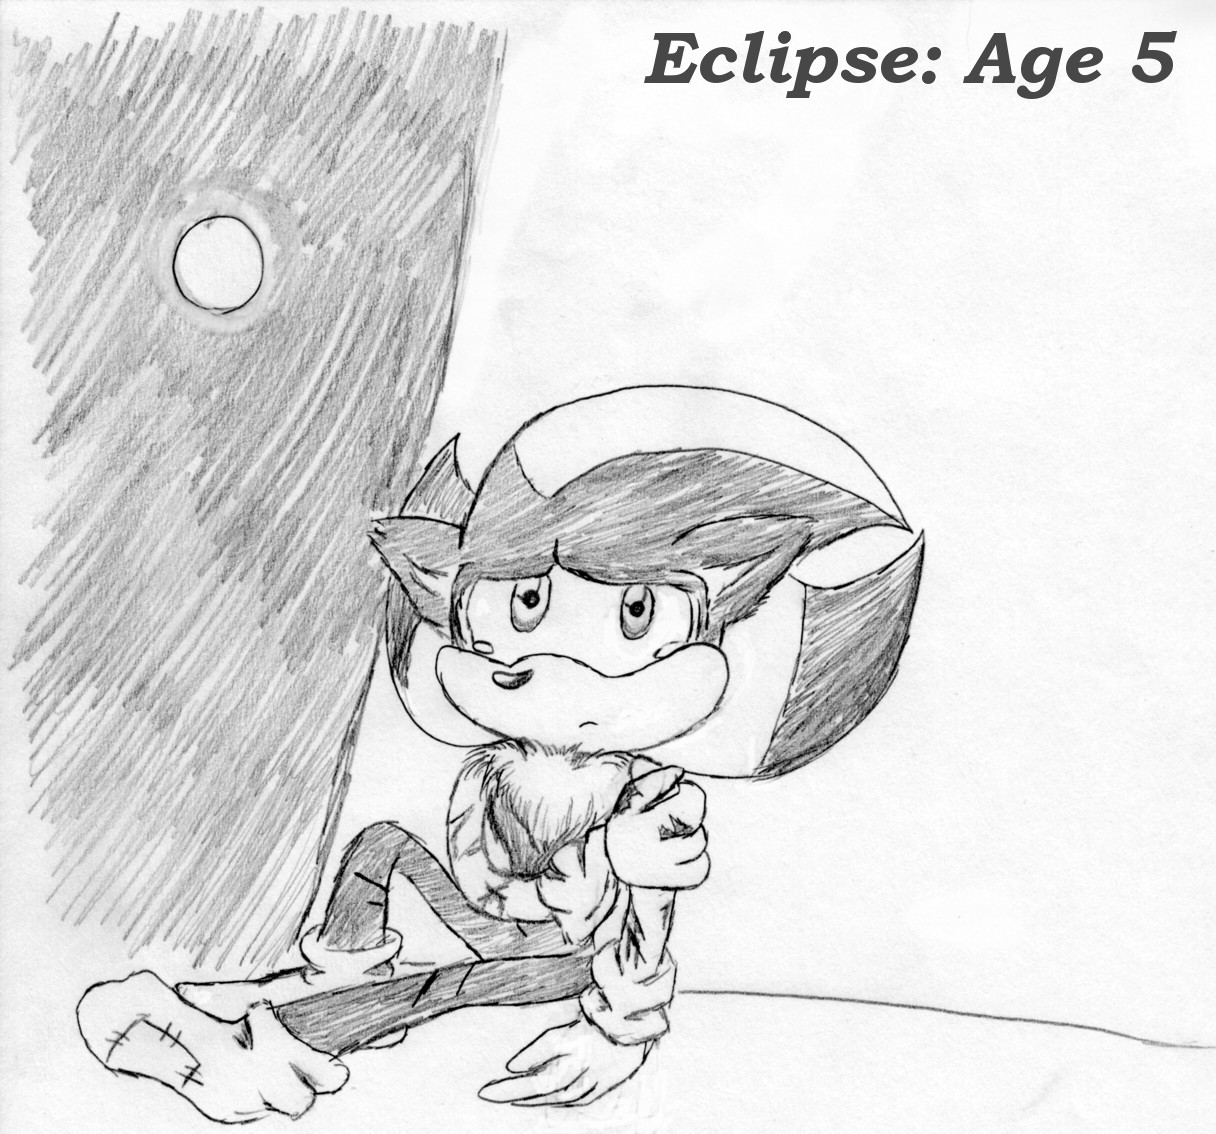 Eclipse - Age 5 by TheGameArtCritic